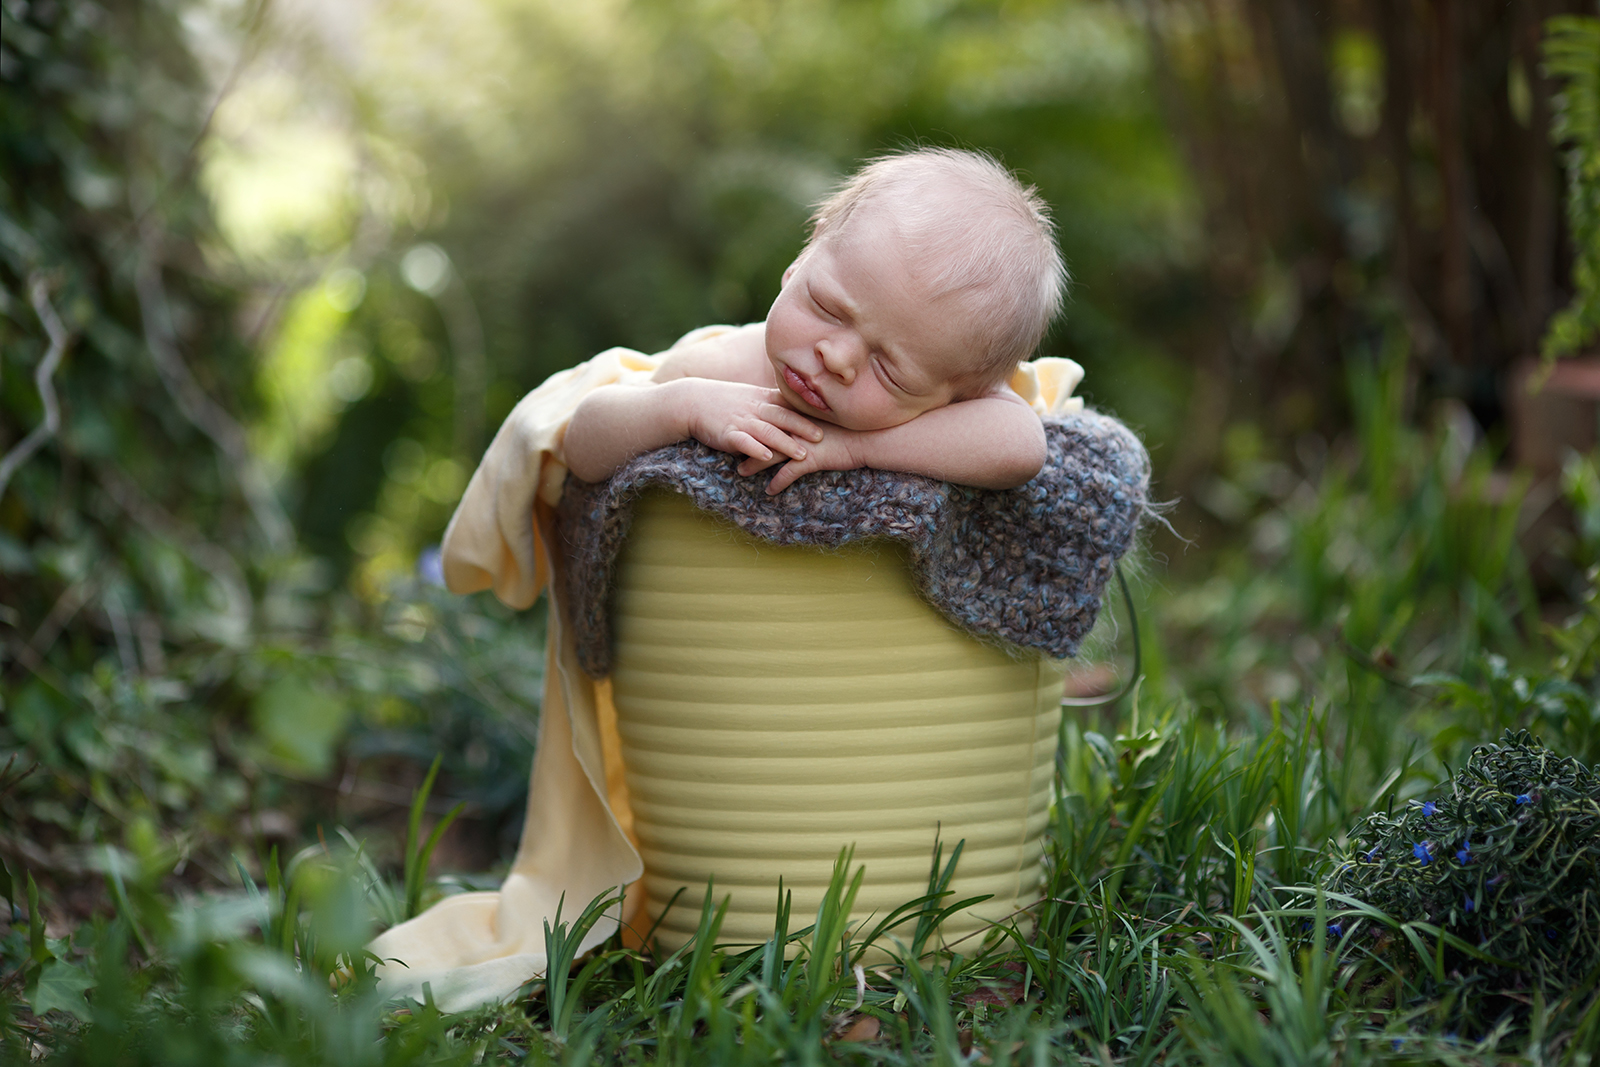 outdoor newborn portraits offered in the triangle area by Michelle Studios Raleigh photographer